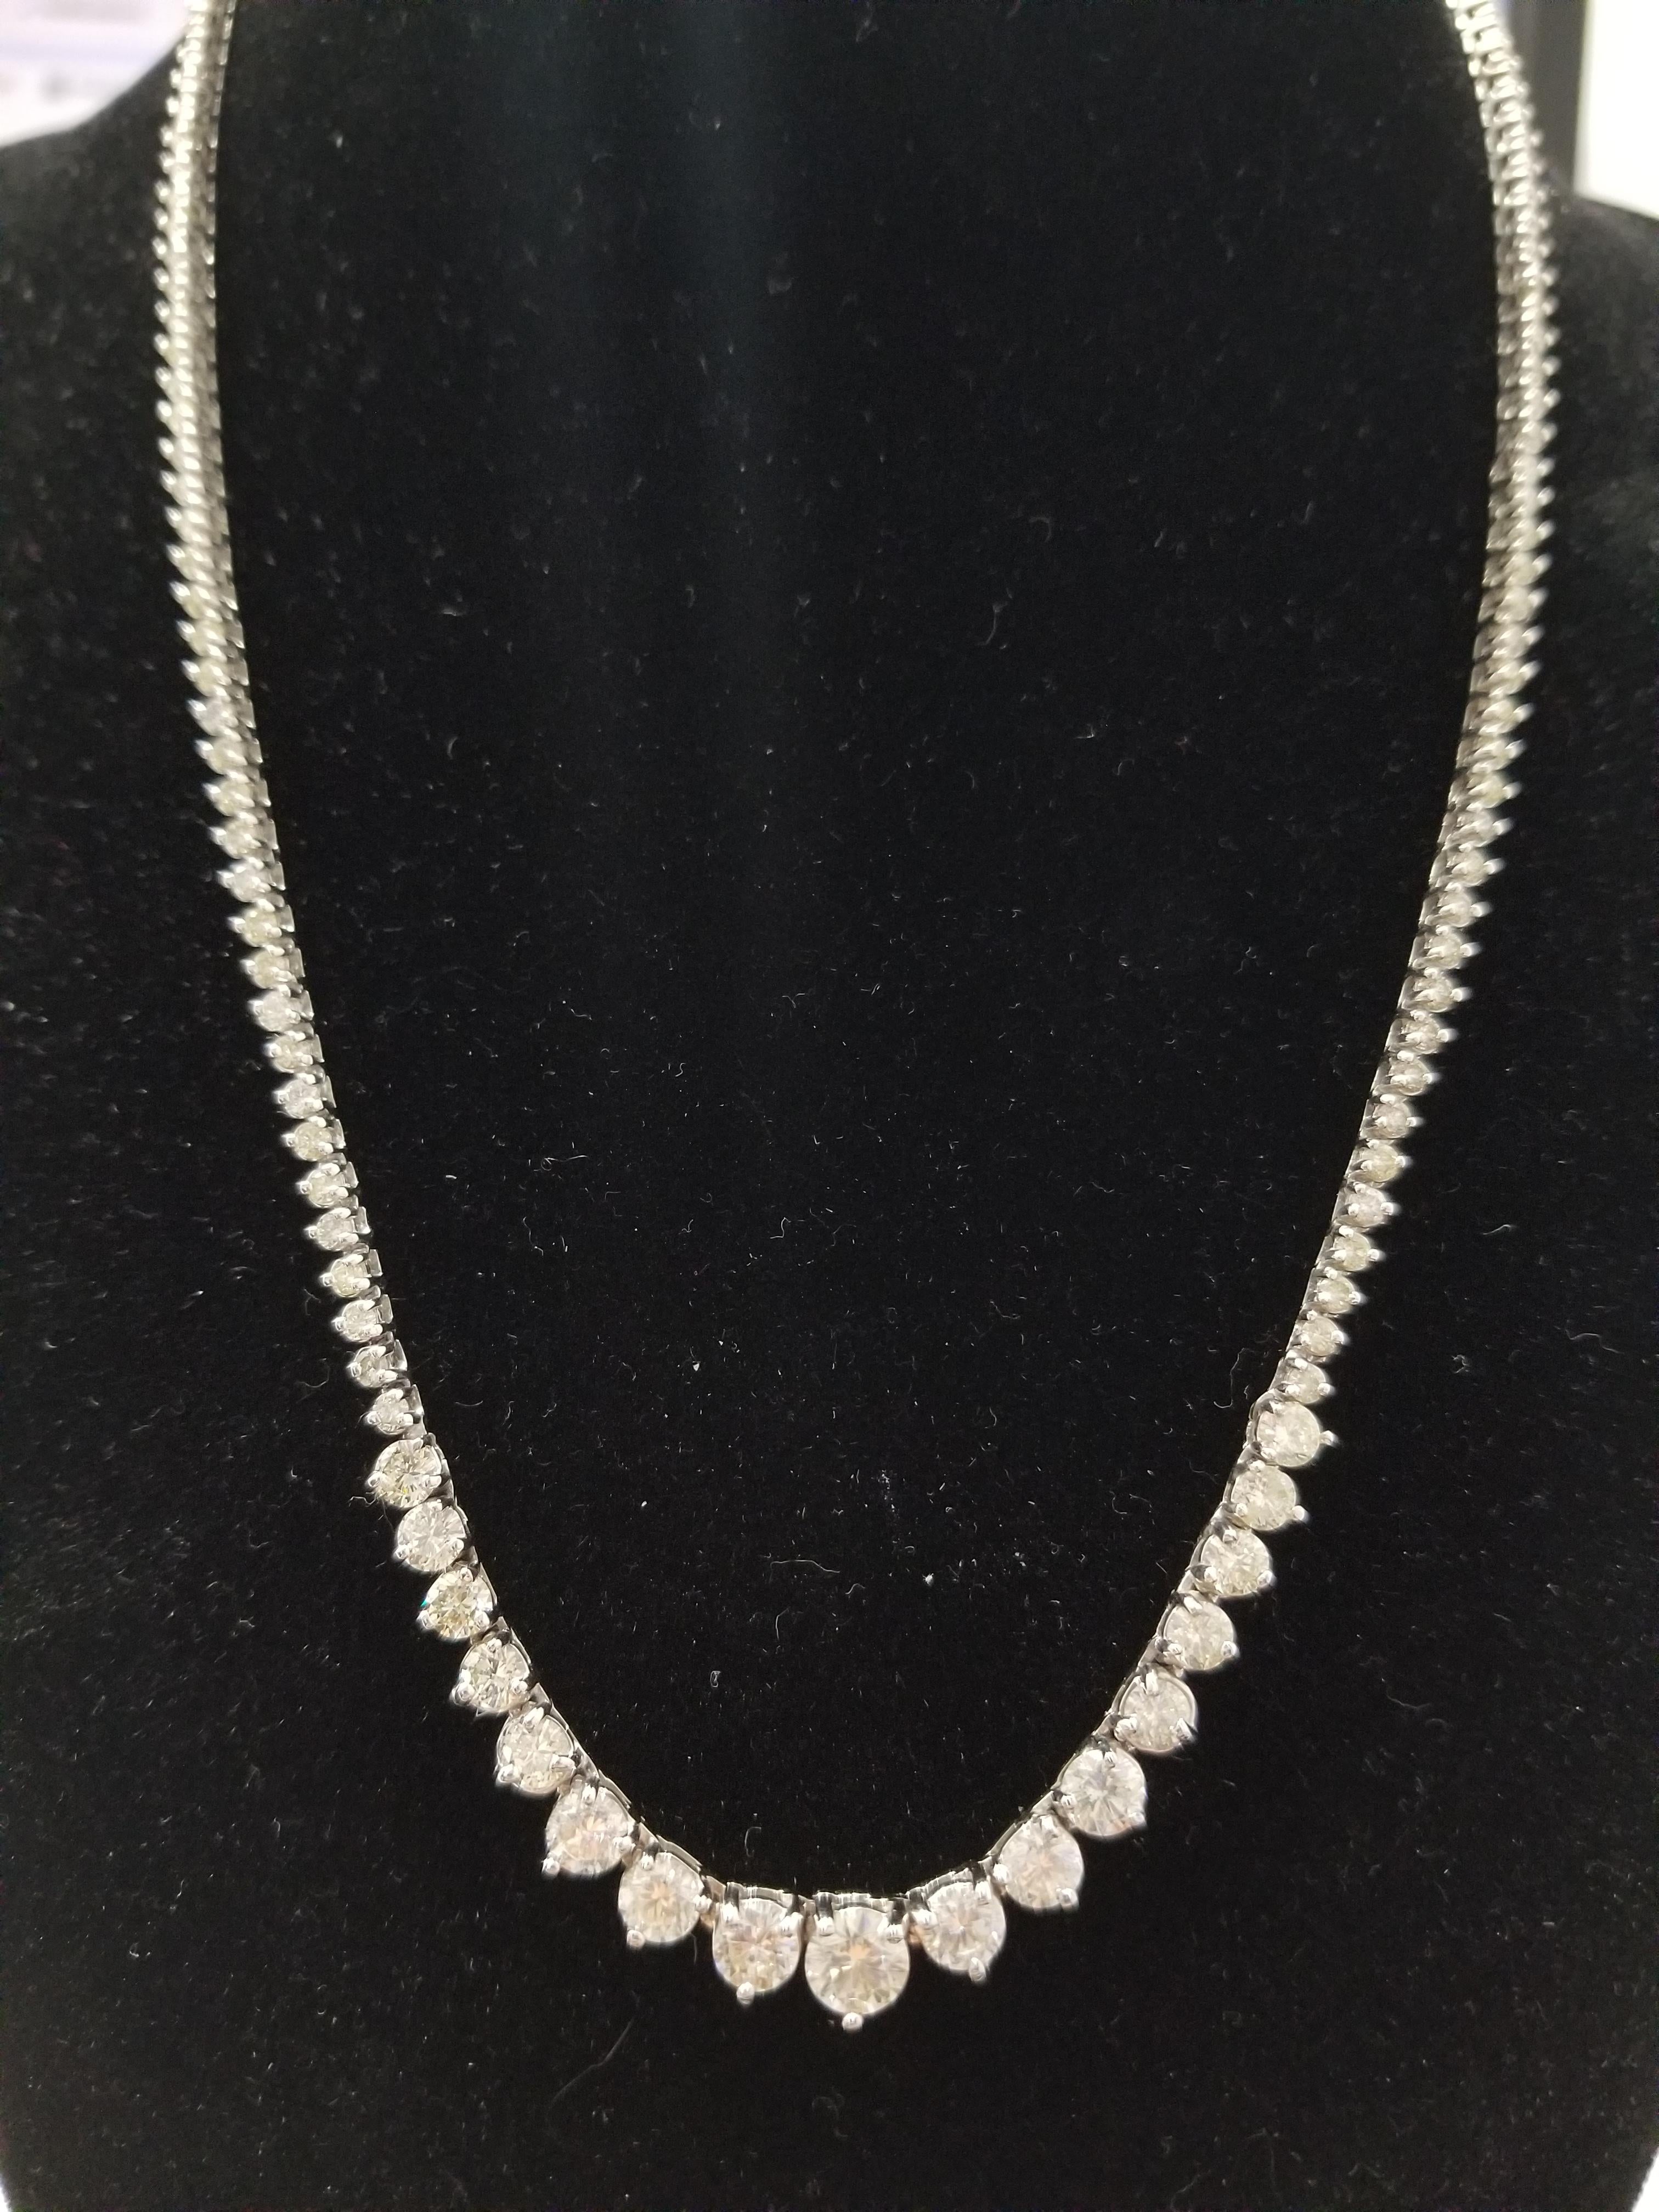 Stunning 14 Karat White Gold Round Brilliant Cut Diamond Tennis Necklace set on 3- prong setting. The total diamond weight is 9.05 carats. The closure is an insert clasp with safety clasp. Length is 18 inches. center stone 0.60ct. VERY SHINY EYE